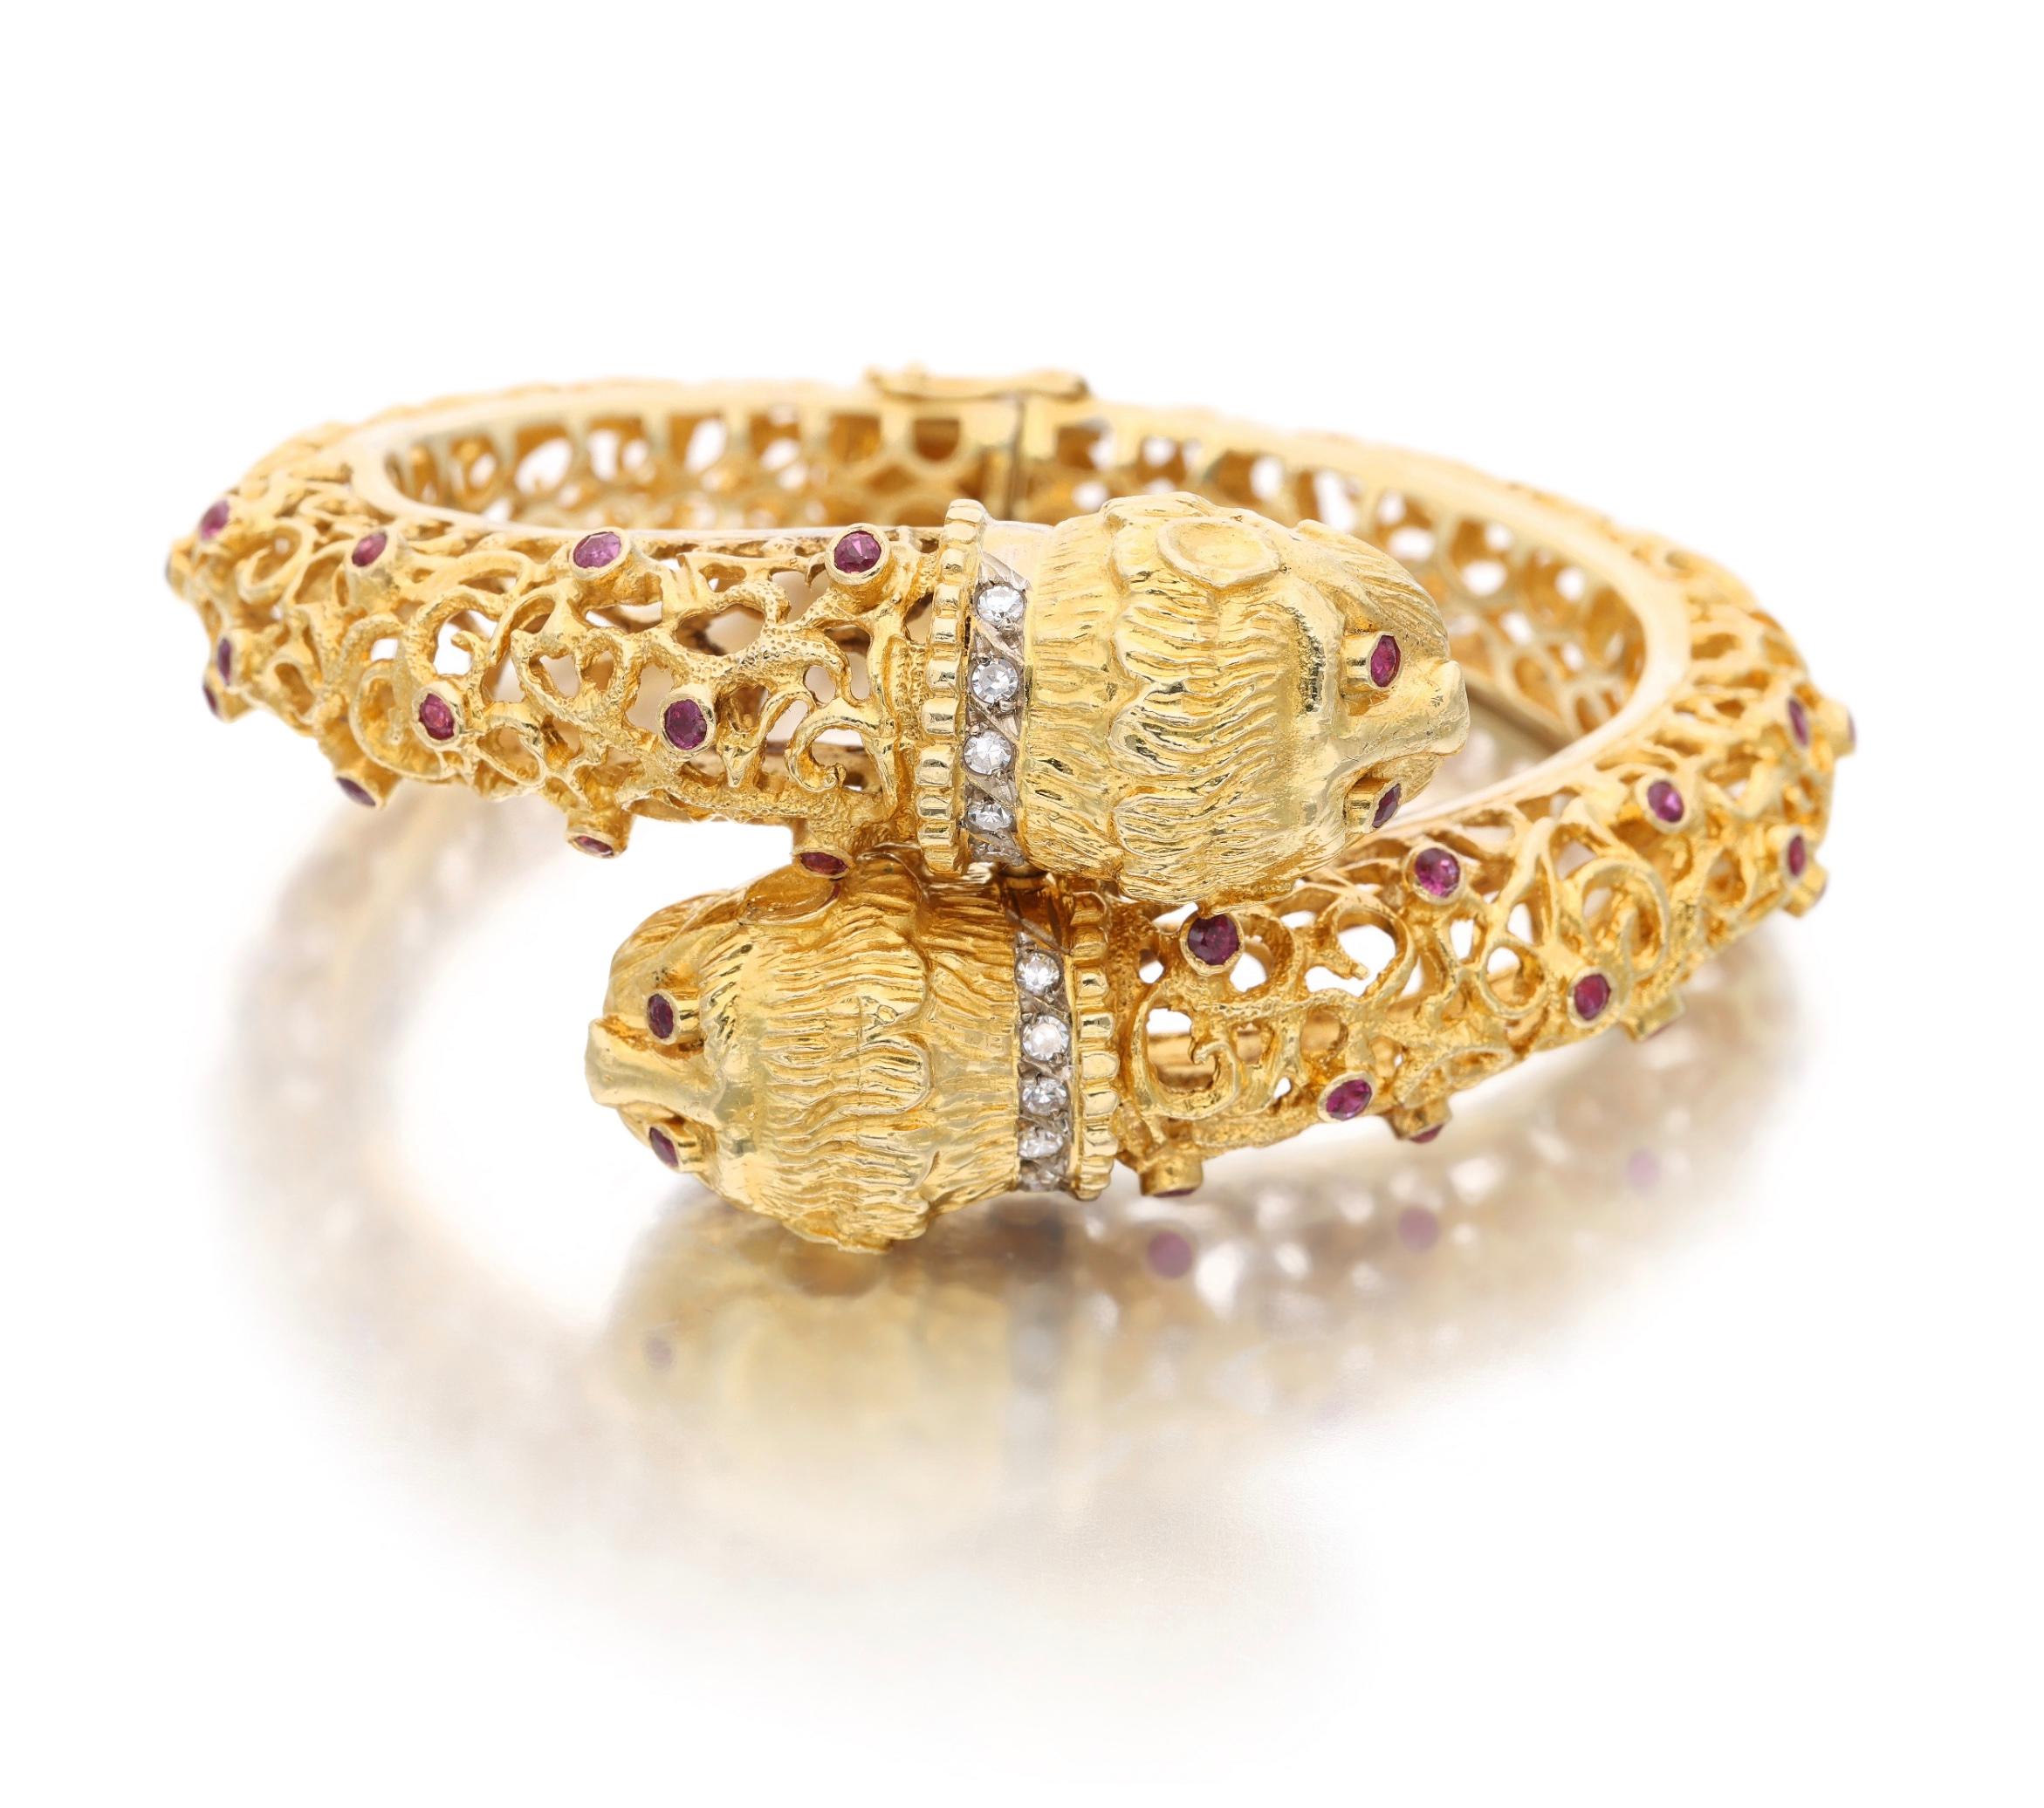 A two-headed chimera bangle bracelet made out of 18 karat yellow gold. It is sprinkled with rubies throughout, weighing approximately 2.70 carats. The necks of the two heads are lined with diamonds, weighing approximately 0.20 carat. Made in Greece.